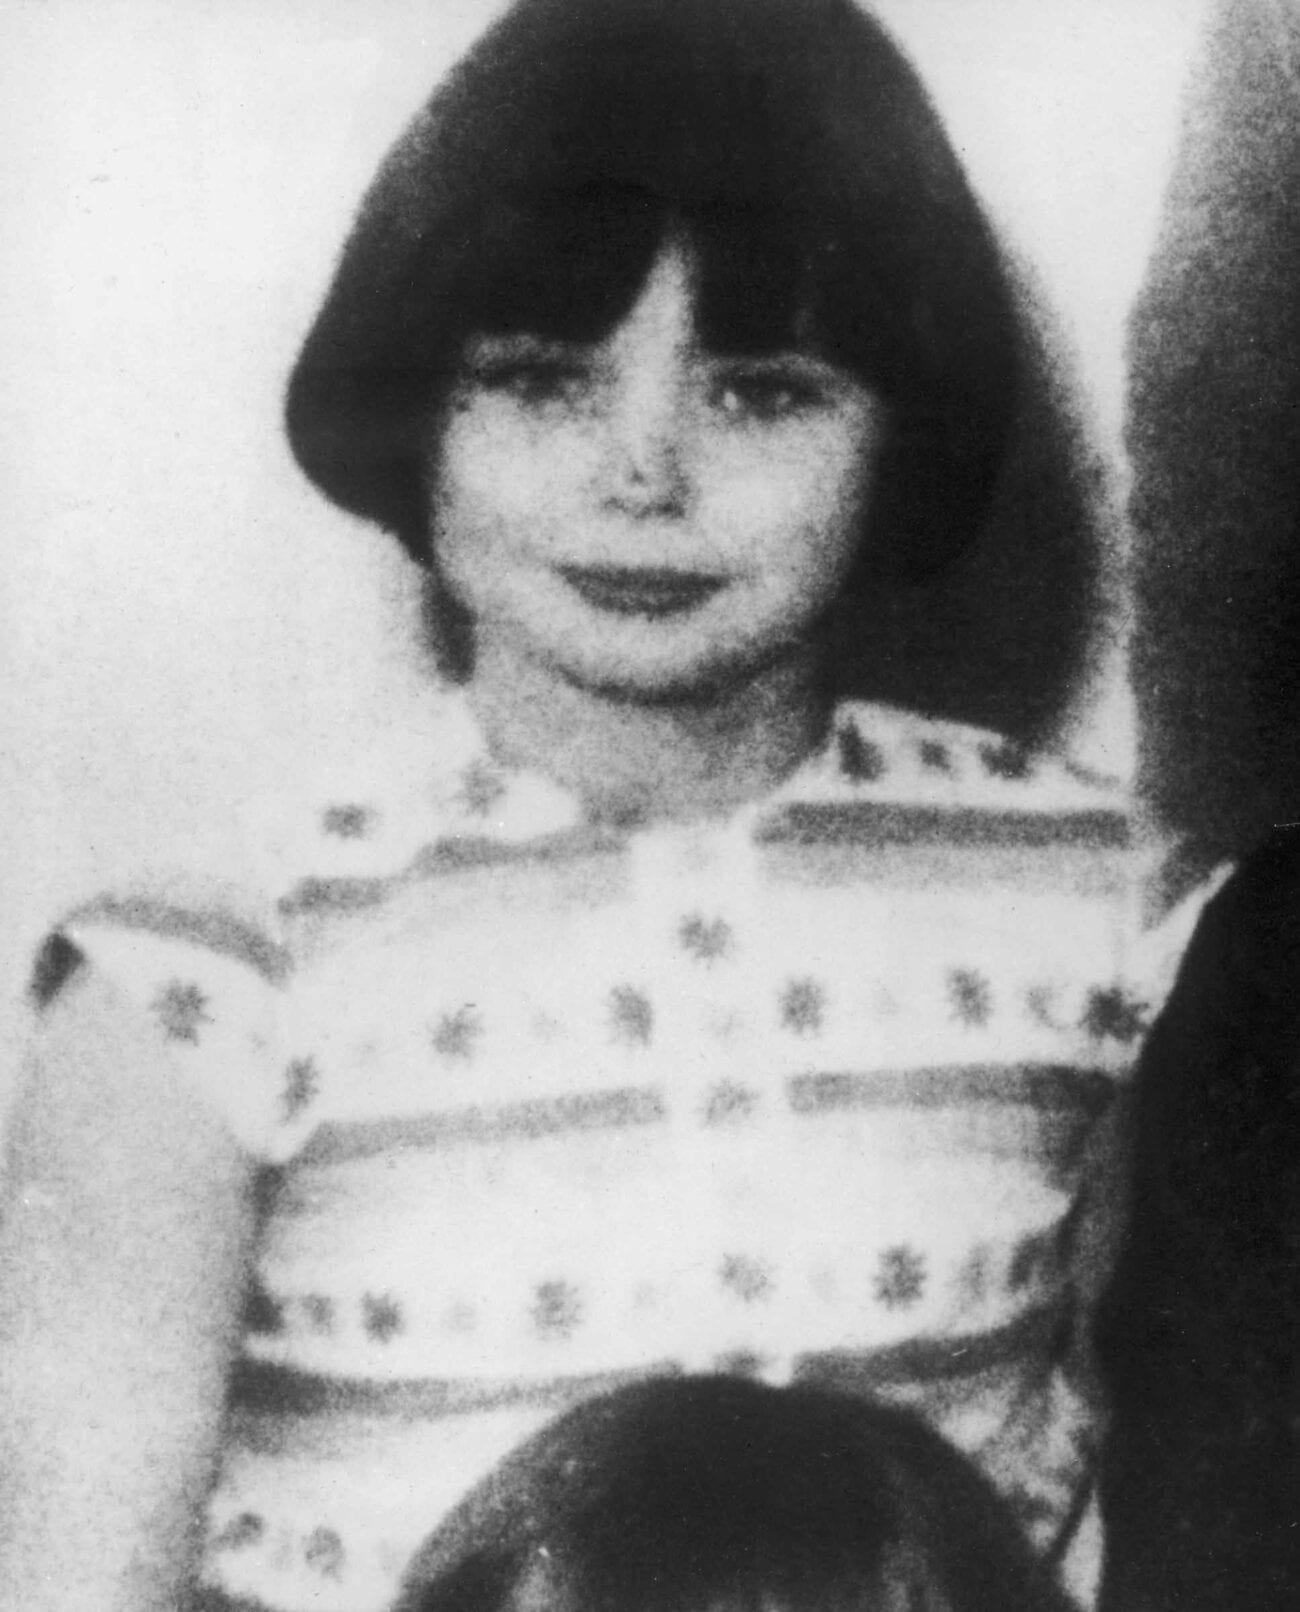 Mary Bell was a 10 year old girl who murdered two toddlers. But after years of abuse prior, is she truly a murderer, or just a victim of her situation?